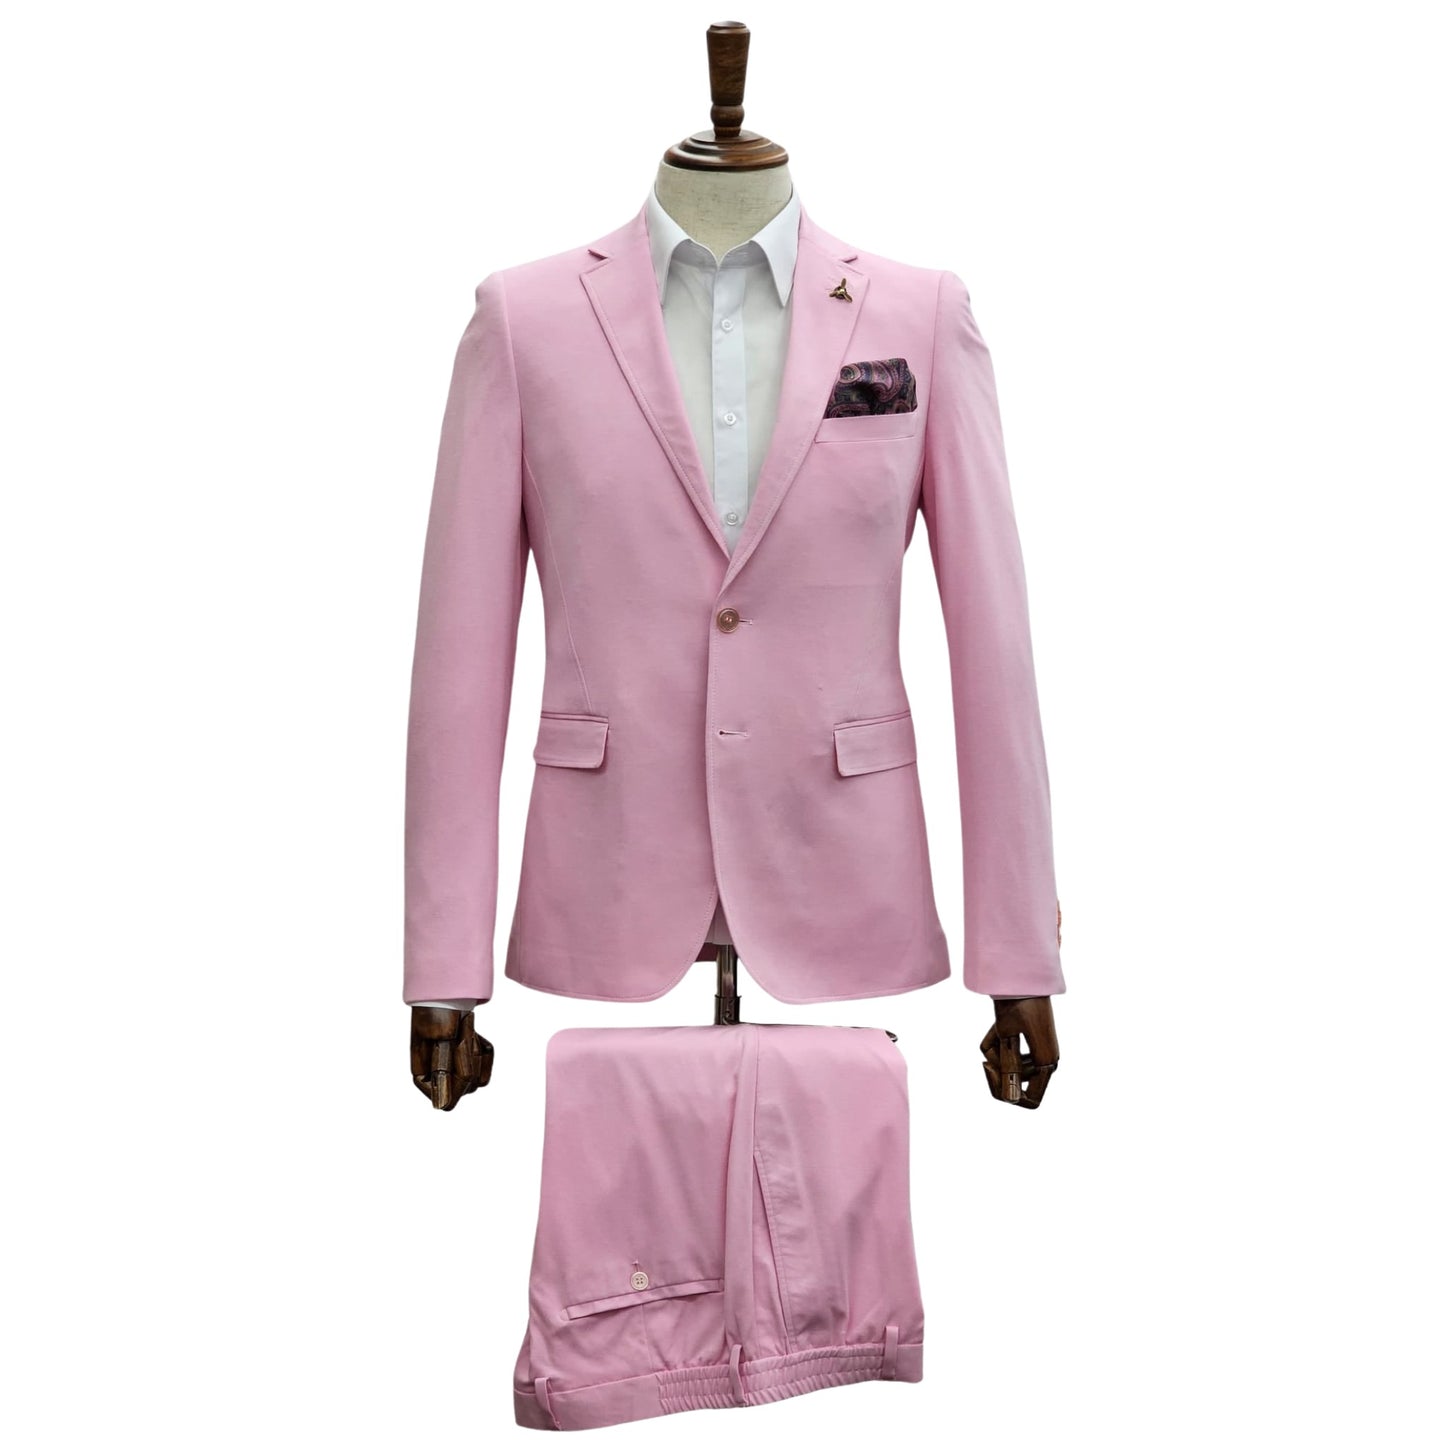 KCT Menswear's Pink Stretch Summer Suit Set on display, offering a fresh and comfortable seasonal style